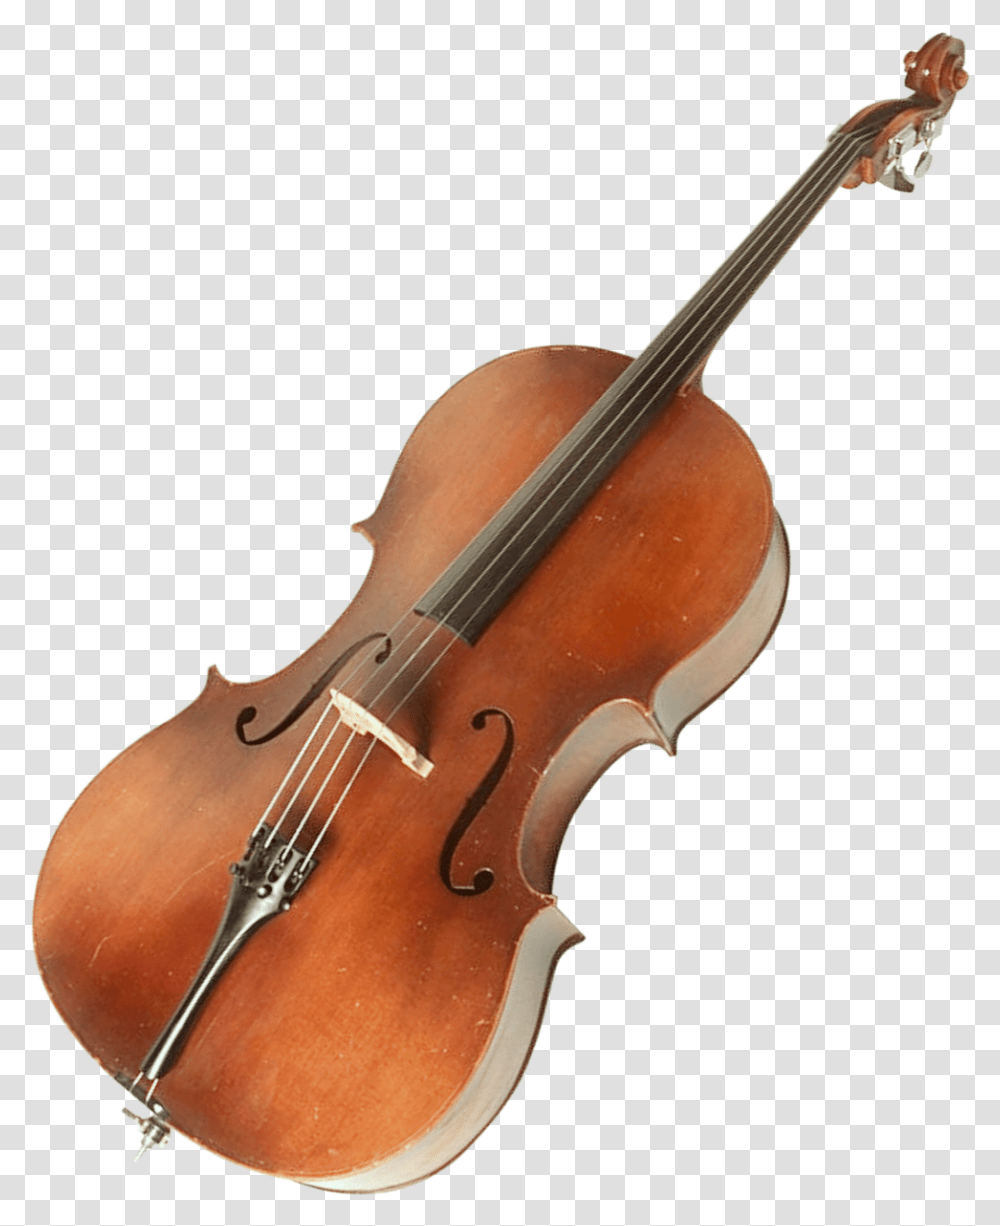 Remixed From Public Domainremixit Musical Bow Instrumen Violin, Cello, Musical Instrument, Leisure Activities, Fiddle Transparent Png